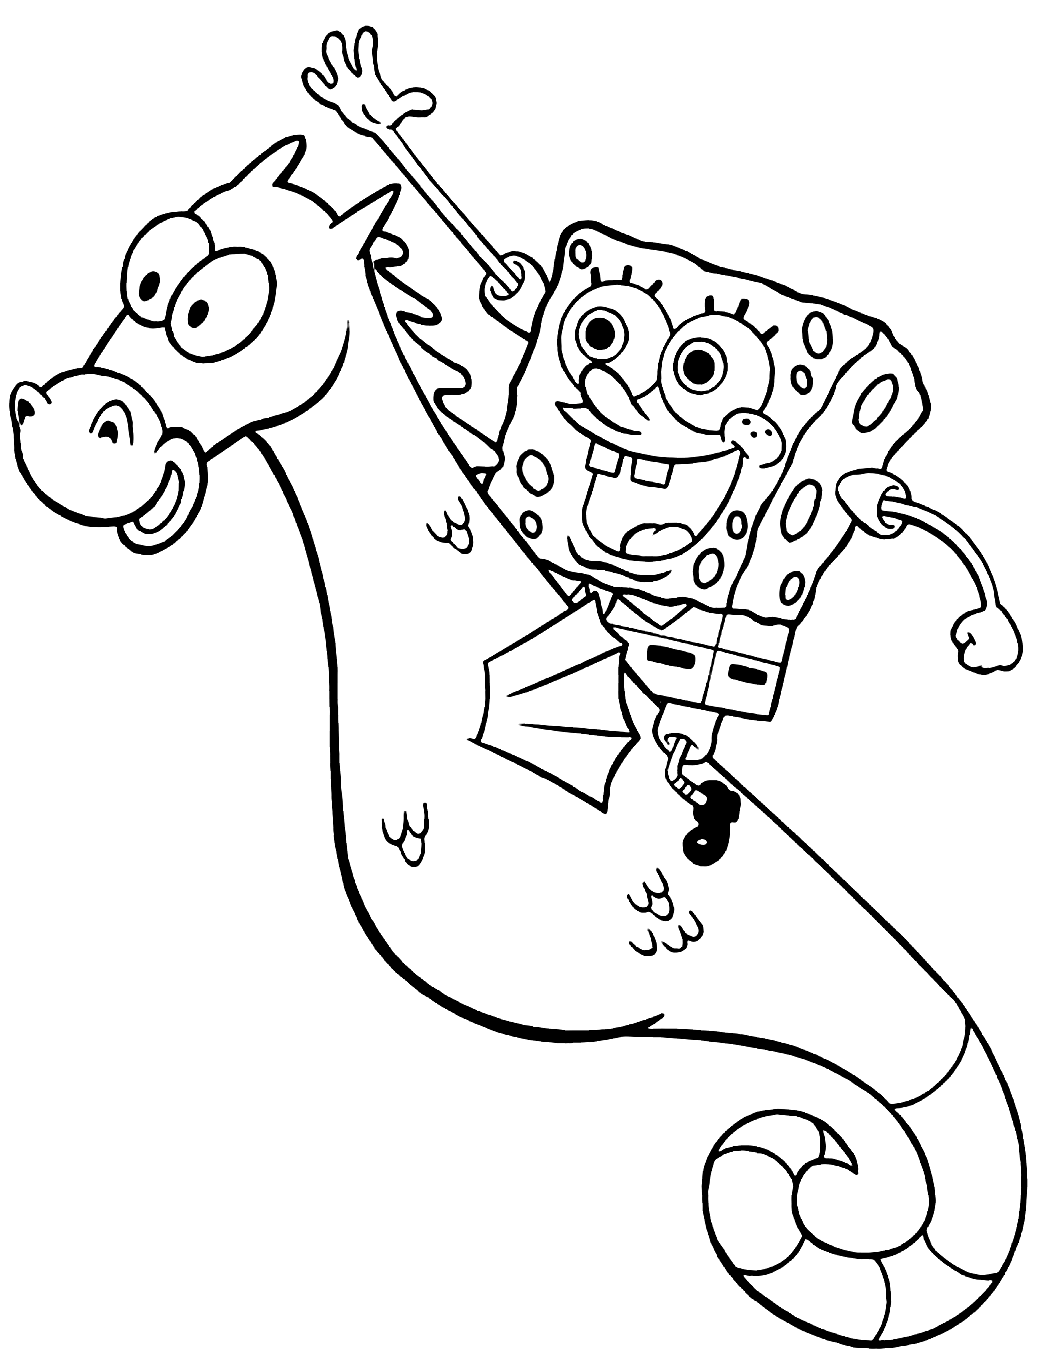 Spongebob Coloring Pages - Coloring Pages For Kids And Adults